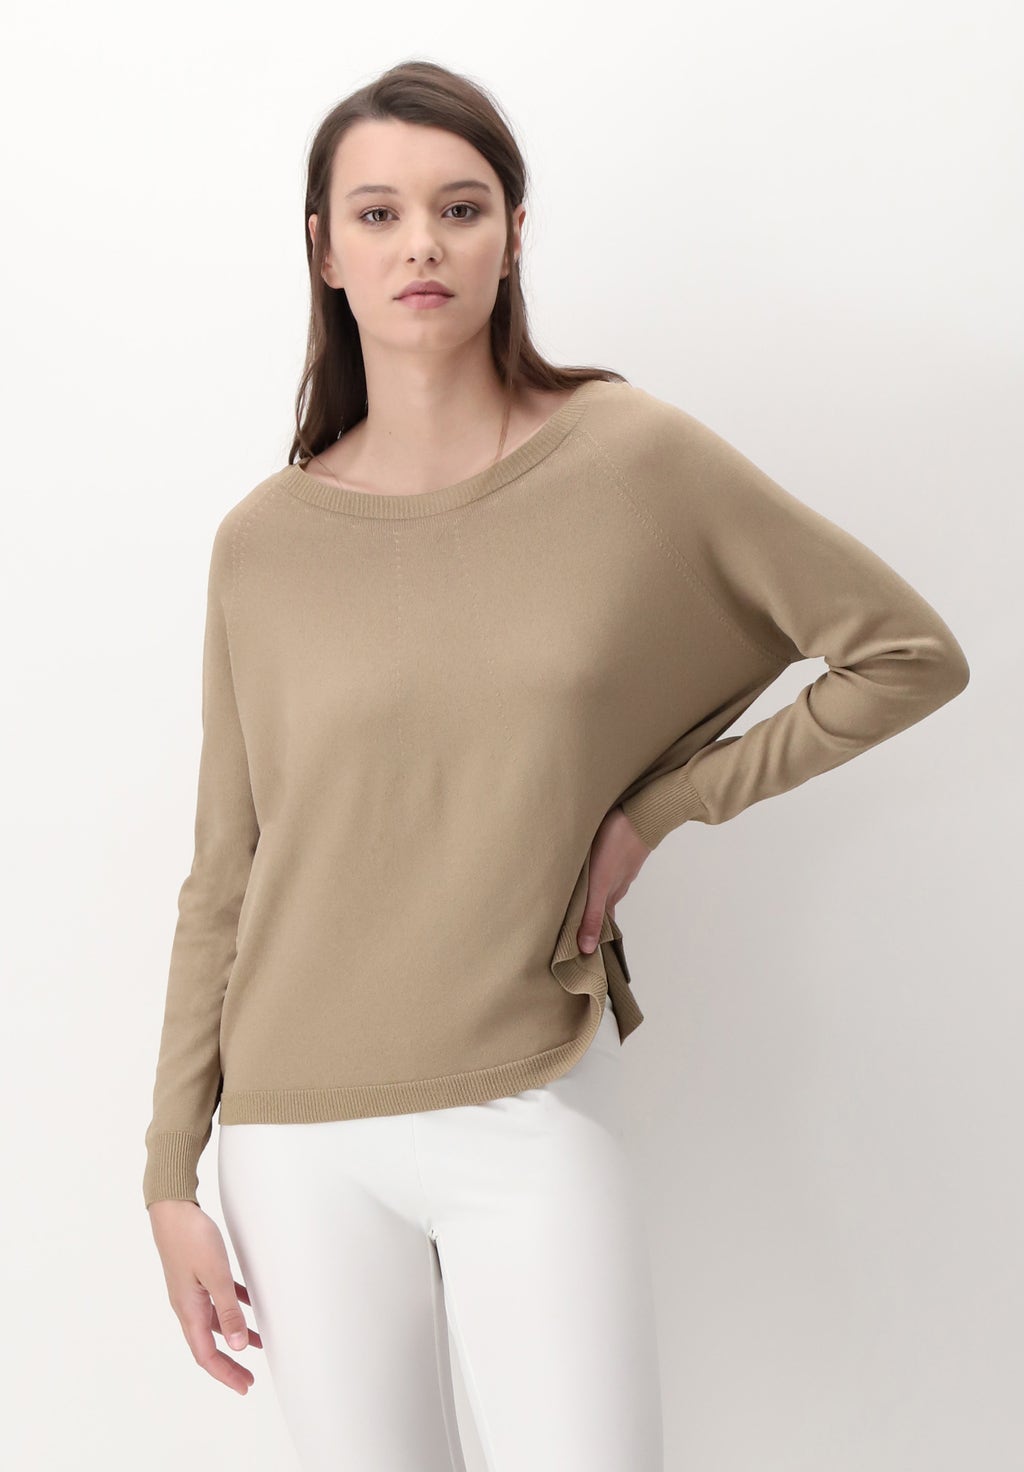 Long-sleeved Viscose Color Knit Sweater